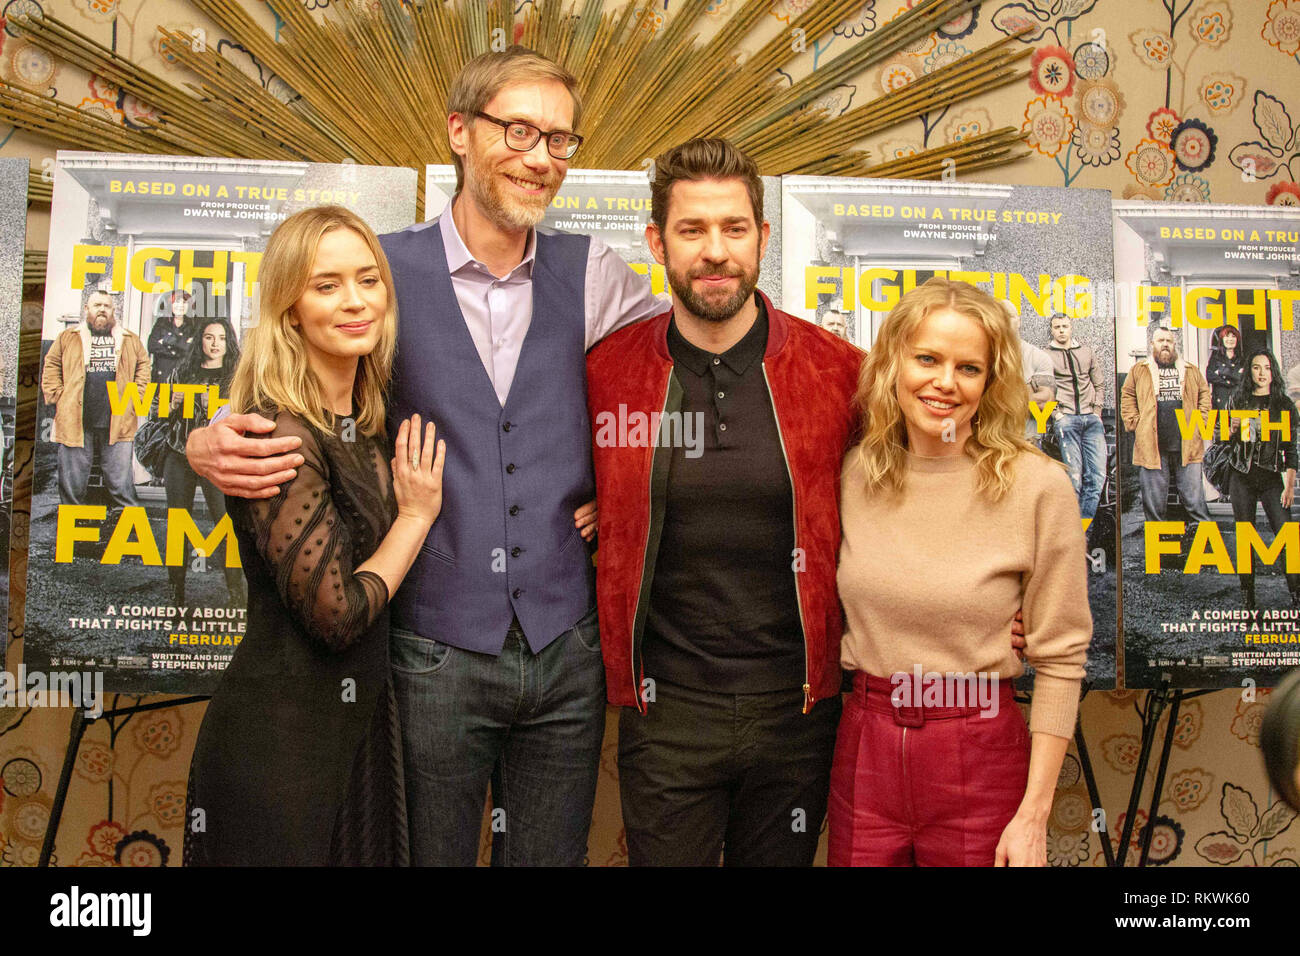 New York, NY, USA. 11th Feb. 2019. (L-R) Emily Blunt, Stephen Merchant, John Krasinksi, and Mircea Monroe attend the New York Tastemaker screening of “Fighting with My Family” at the Crosby Street Hotel in New York City on February 11, 2019. Credit: Jeremy Burke/Alamy Live News Stock Photo